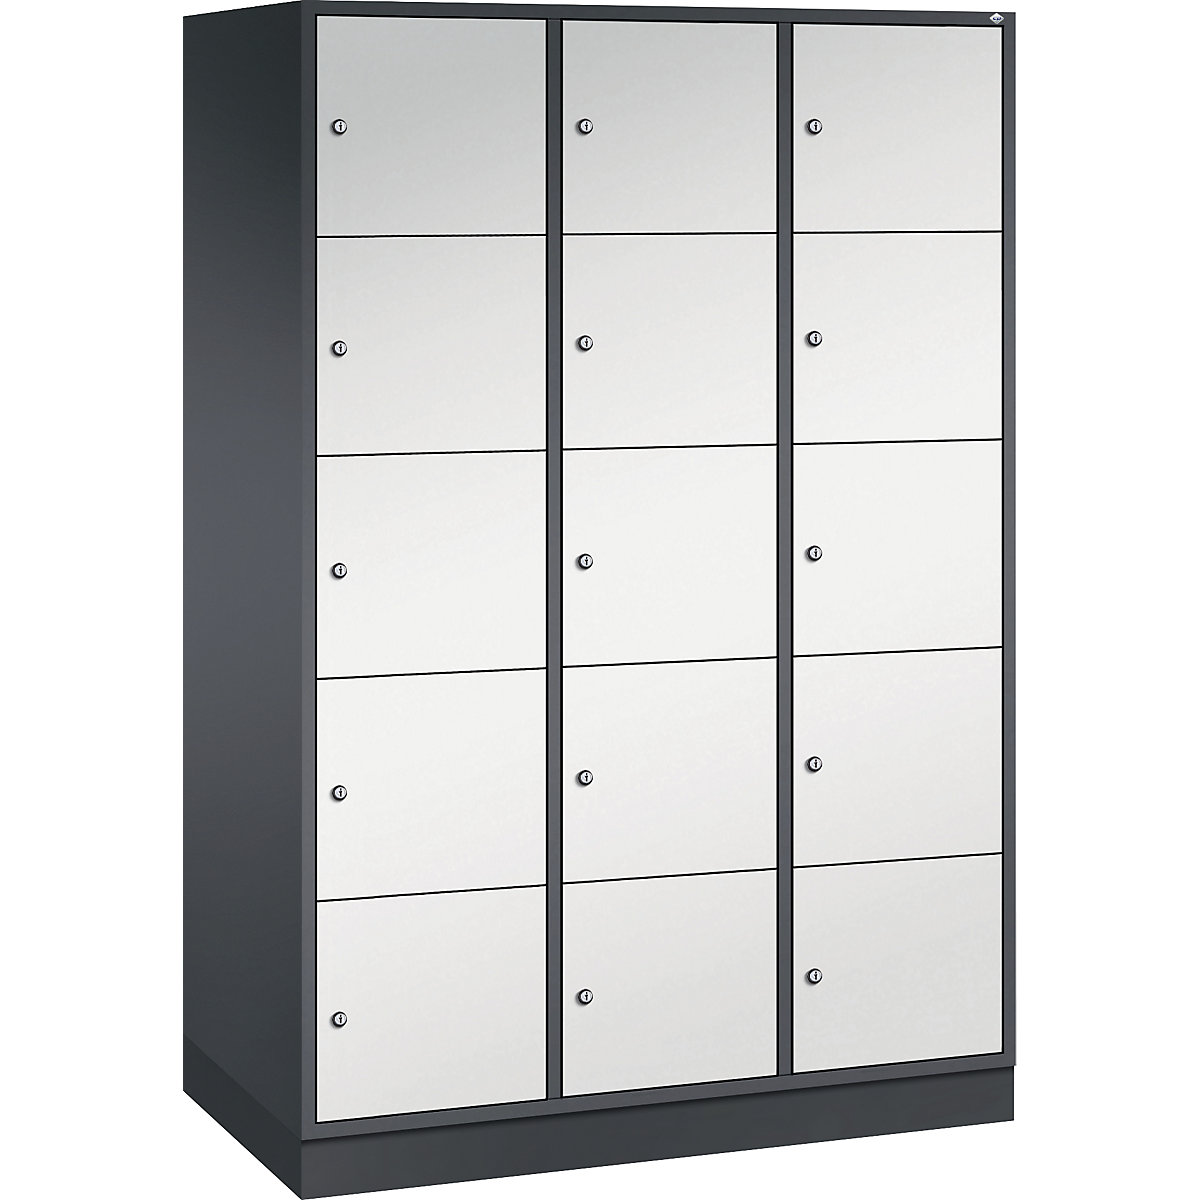 INTRO steel compartment locker, compartment height 345 mm - C+P